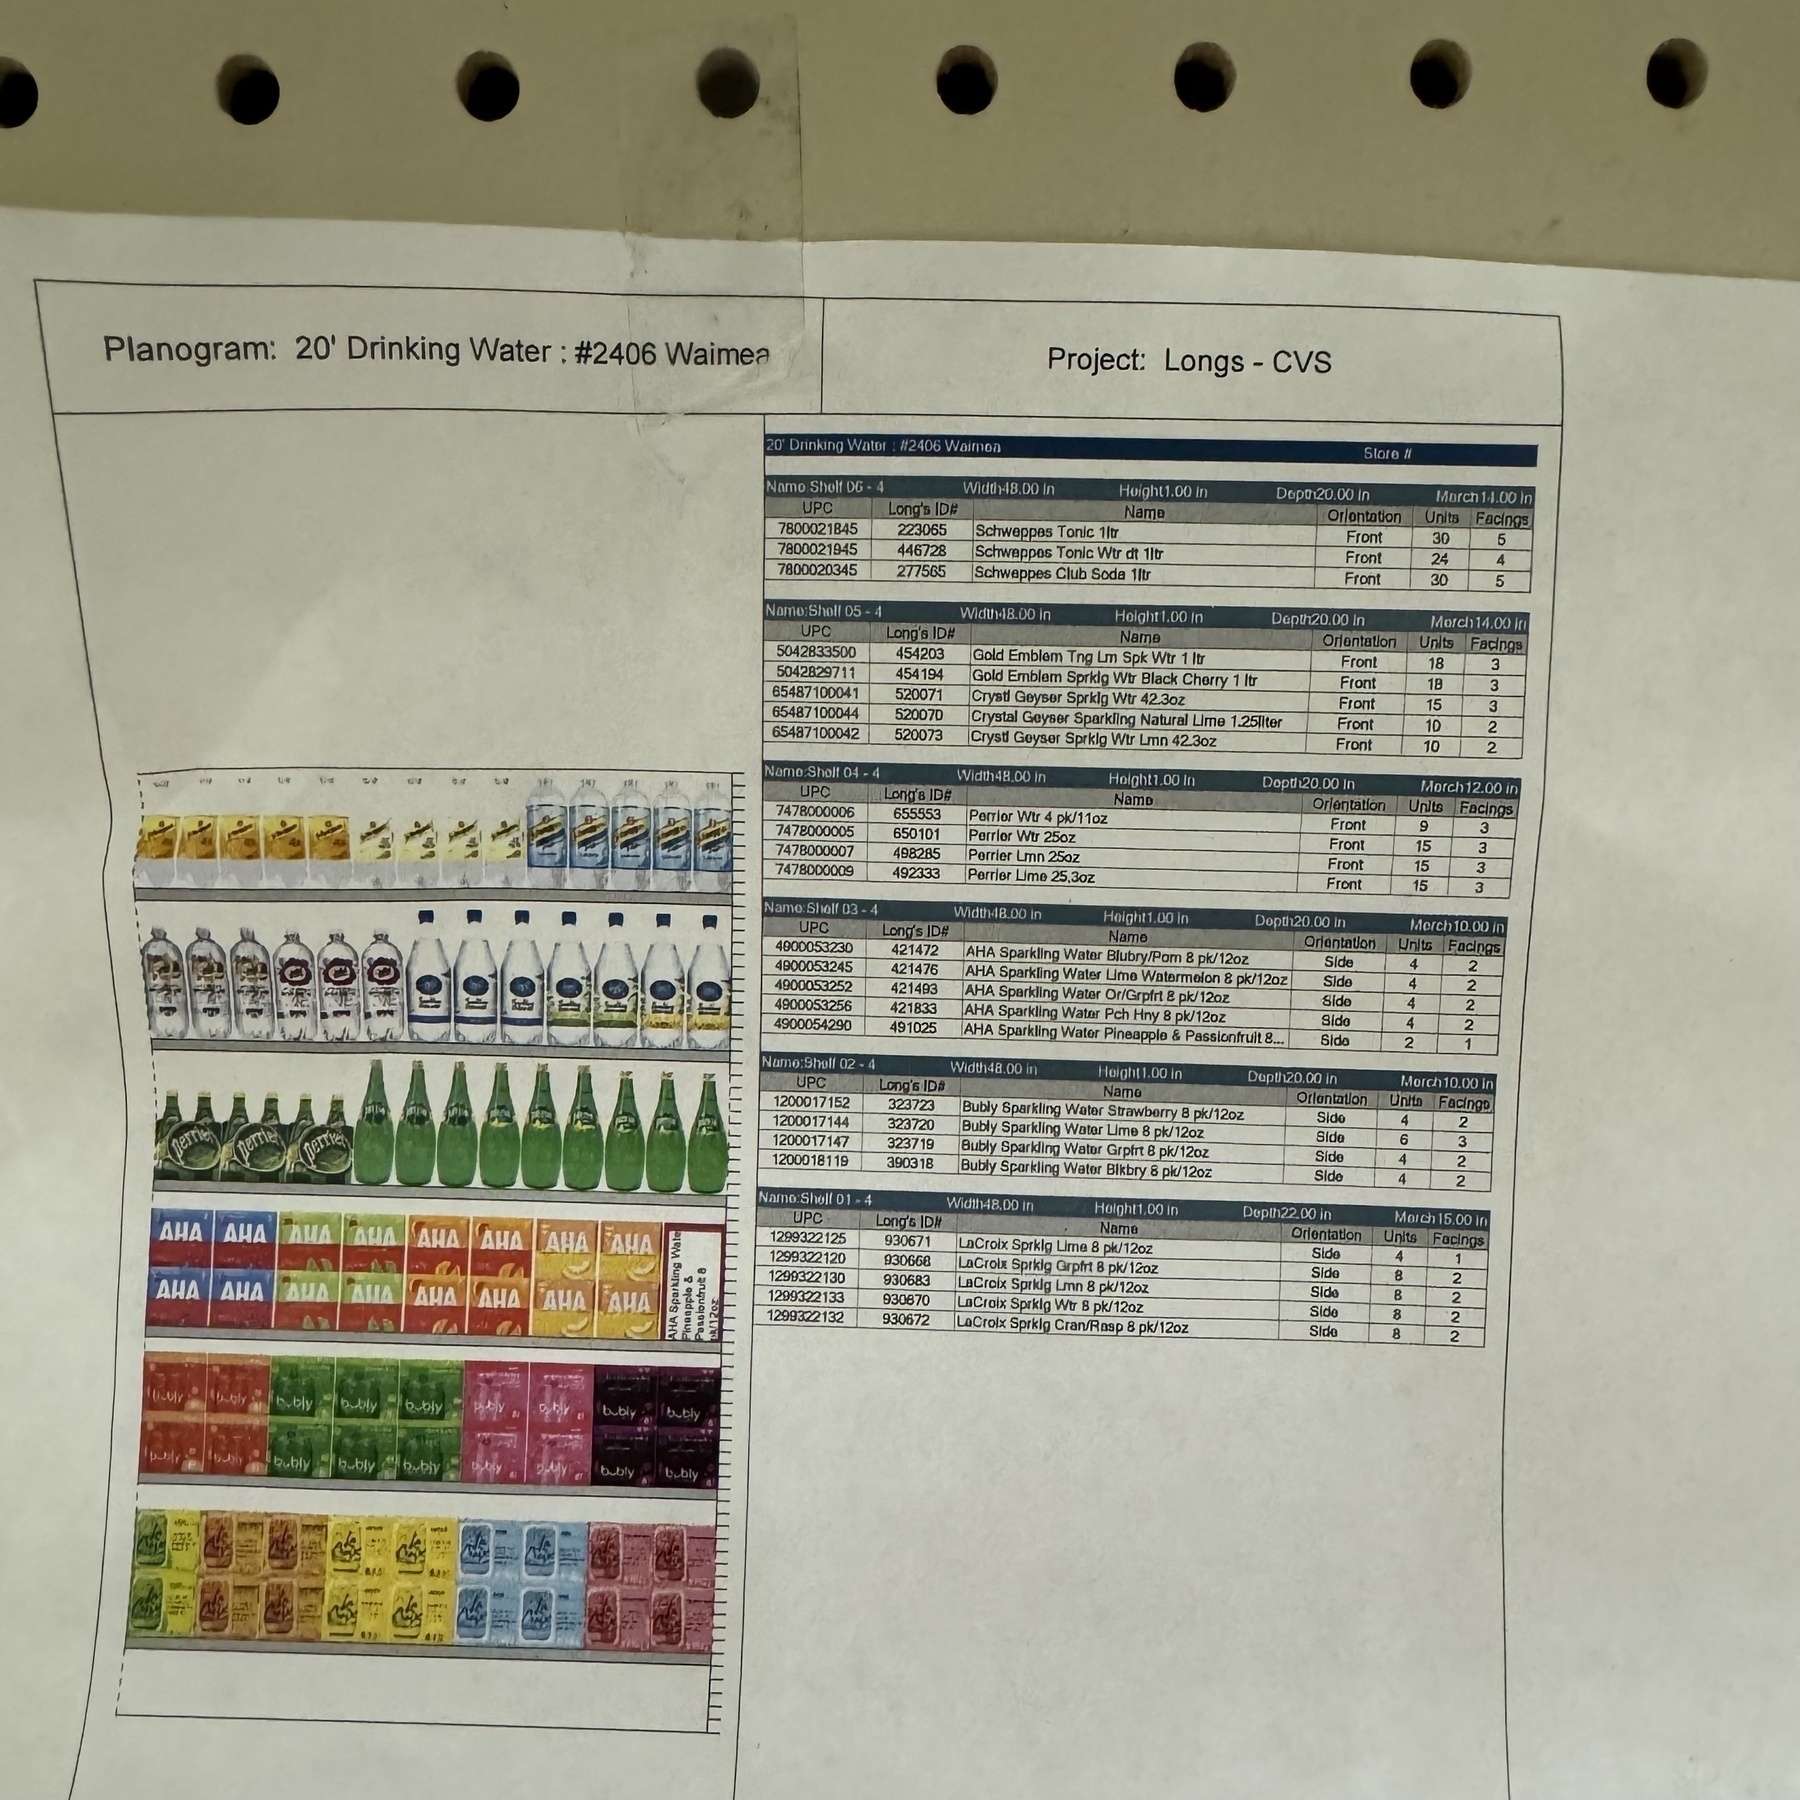 A printed sheet showing exactly how each kind of bottled water should be placed on the shelf at CVS.